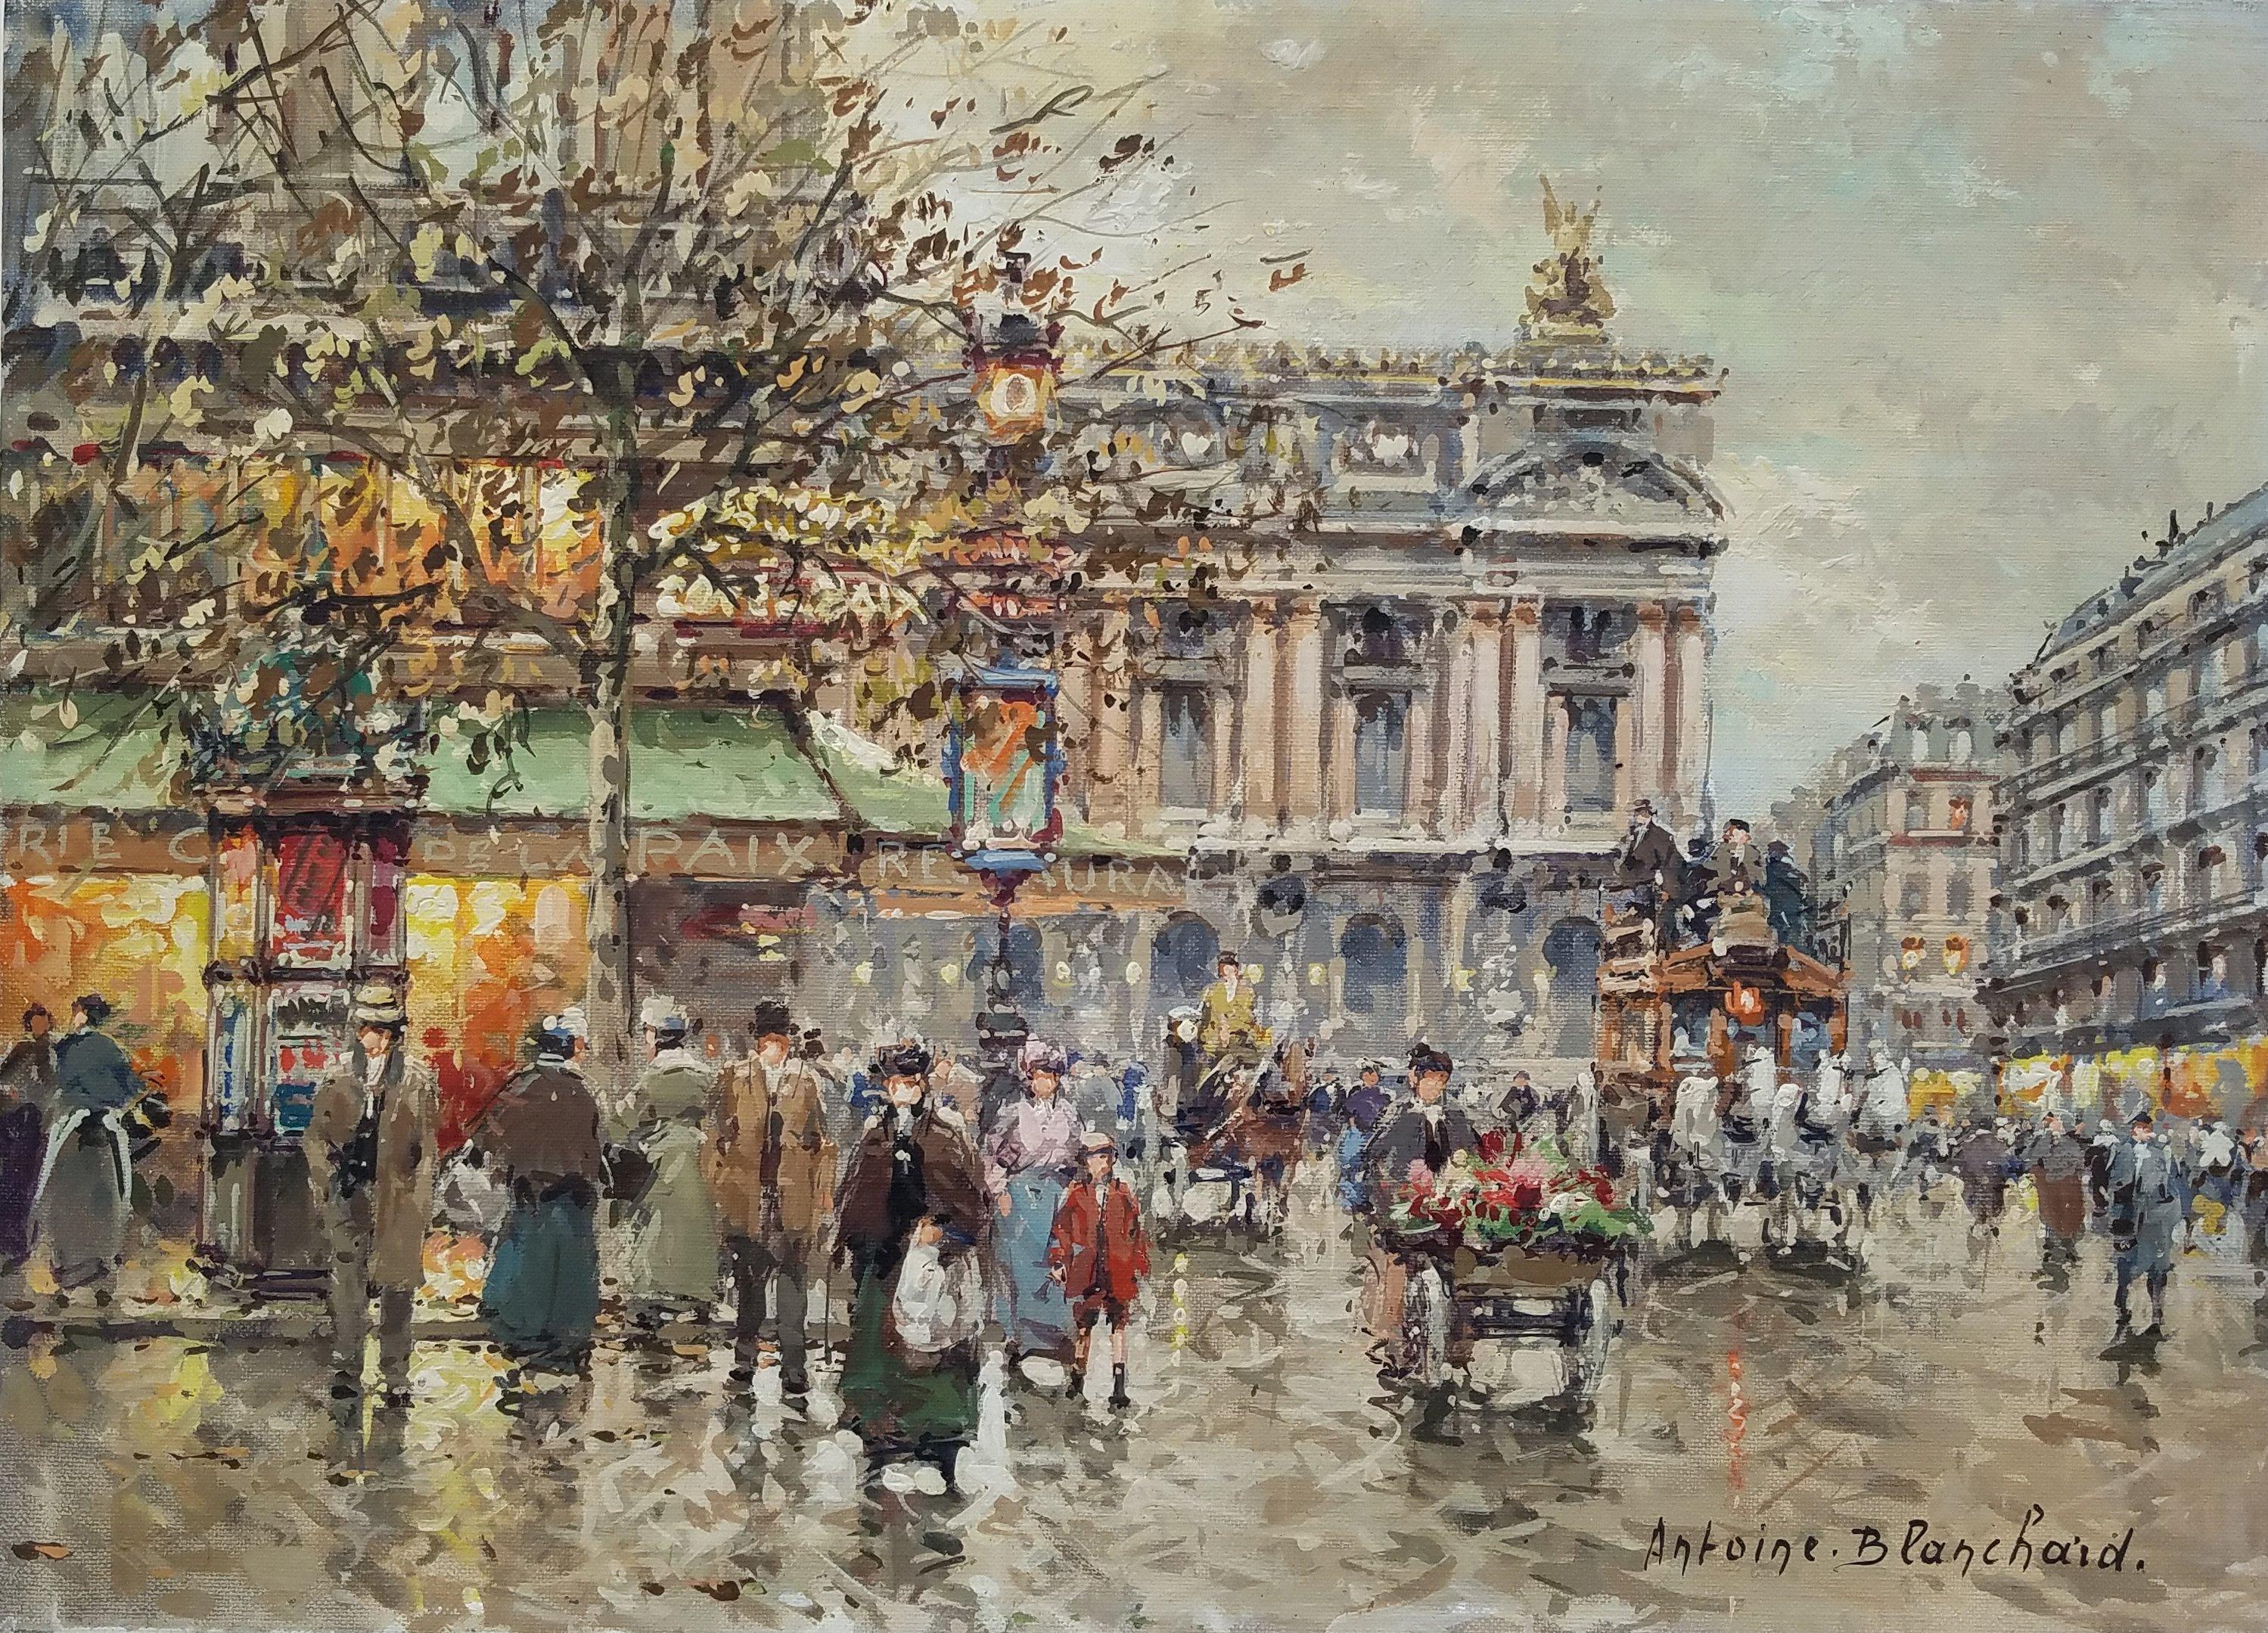 Antoine Blanchard (1910 - 1988)
Place de l'Opera, Paris, France
Oil on canvas
13 x 18 inches
Signed lower right; signed and titled on the reverse

Provenance:
Leopold P. Landsberger (Art dealer that represented Blanchard in Manhattan in the 1970's